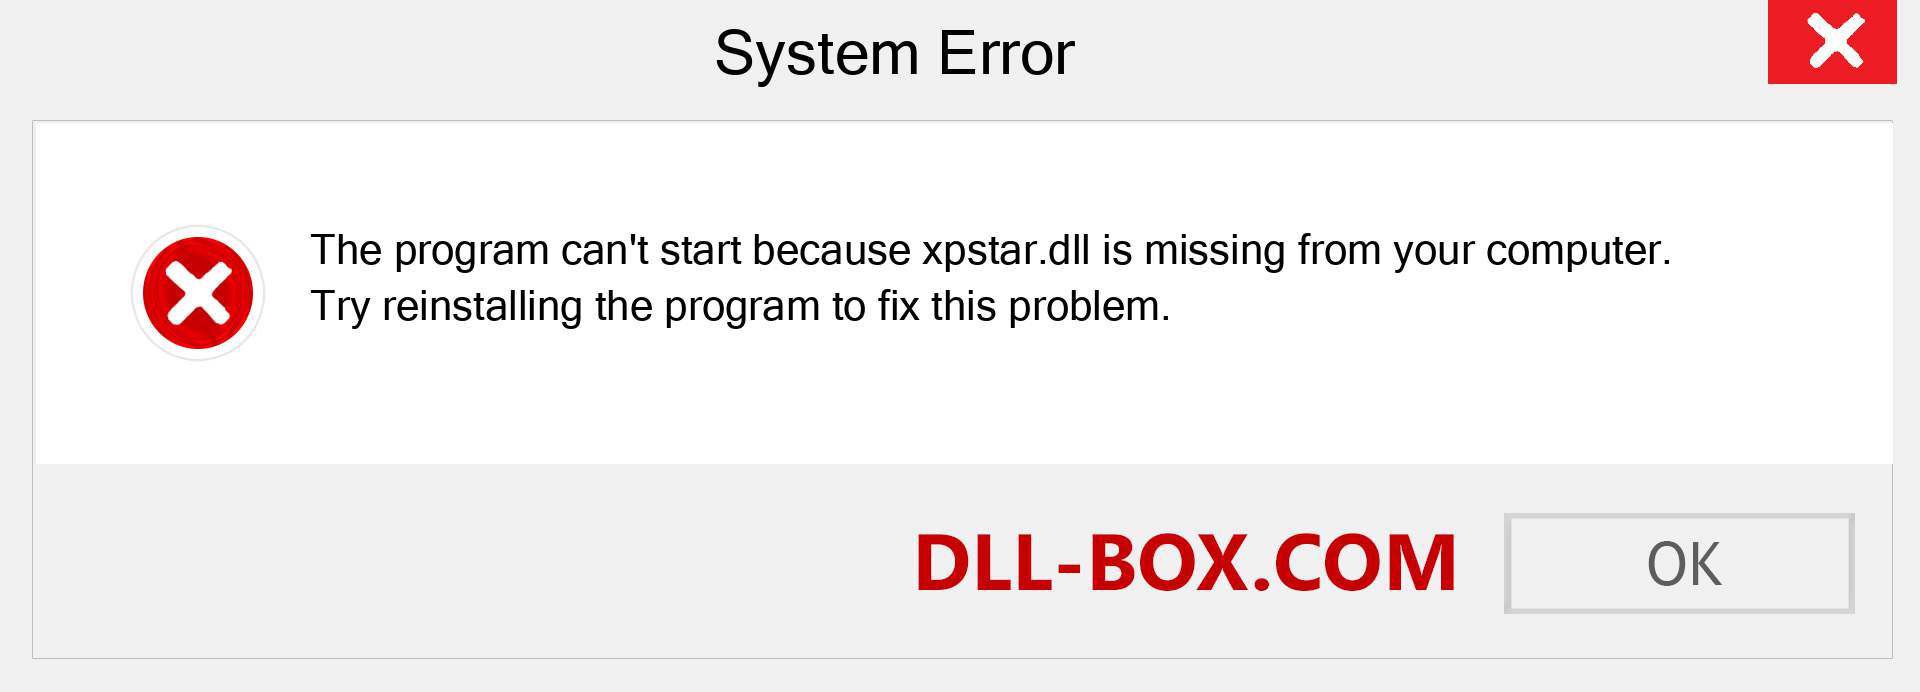  xpstar.dll file is missing?. Download for Windows 7, 8, 10 - Fix  xpstar dll Missing Error on Windows, photos, images